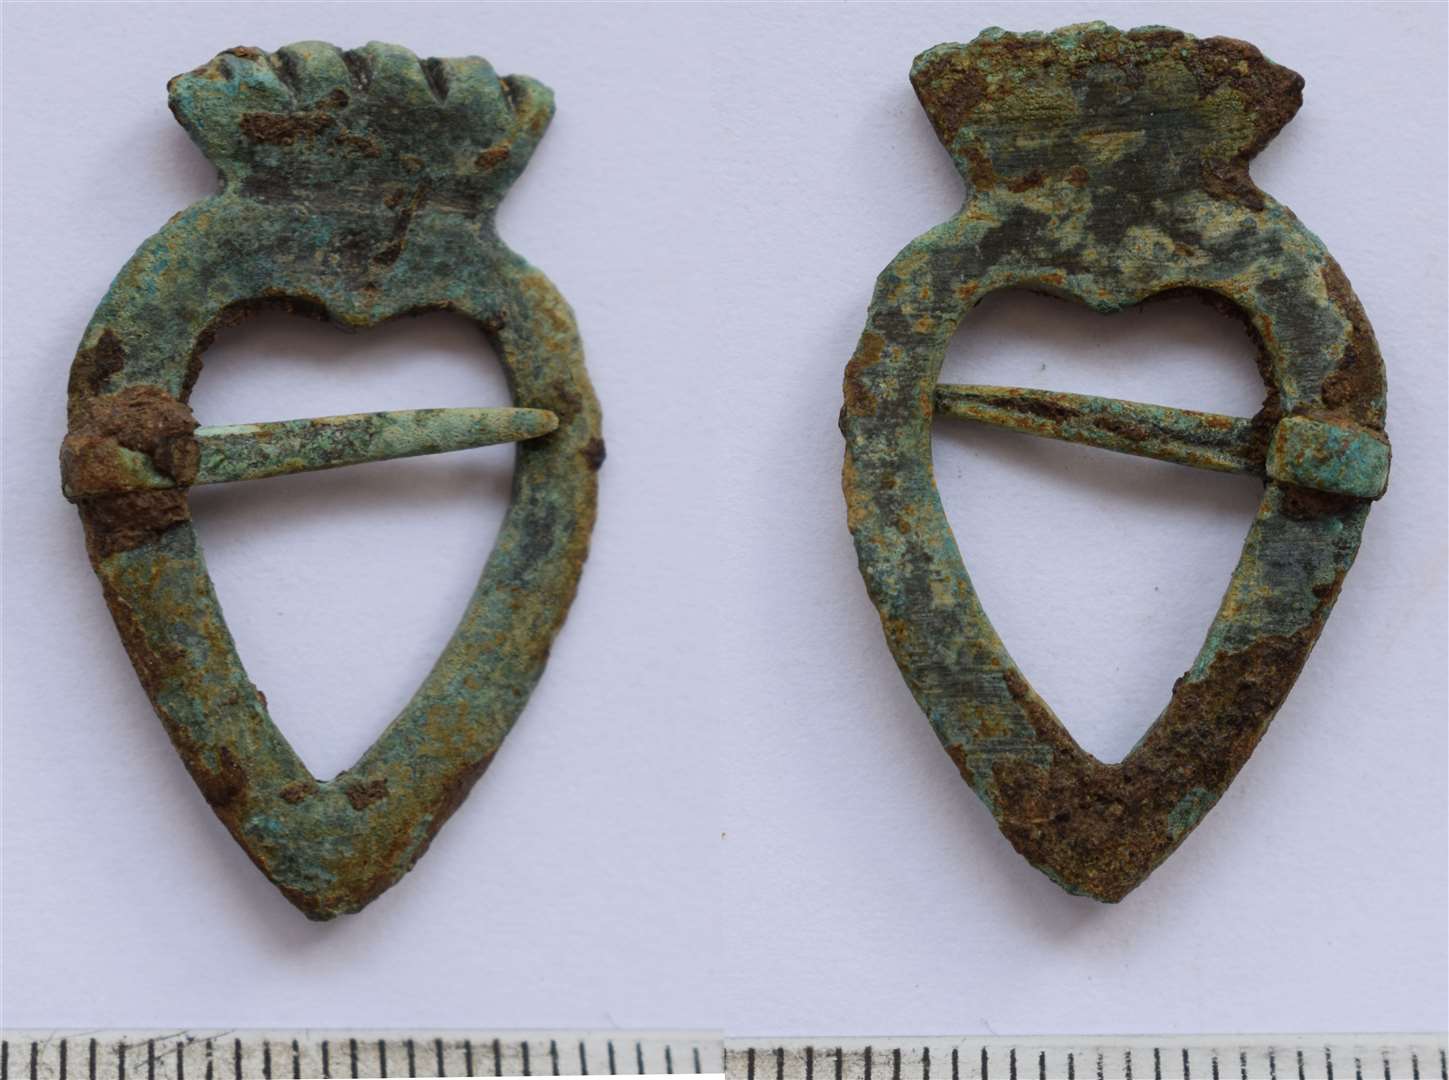 A brooch which was found on the last dig at the Tower House site.